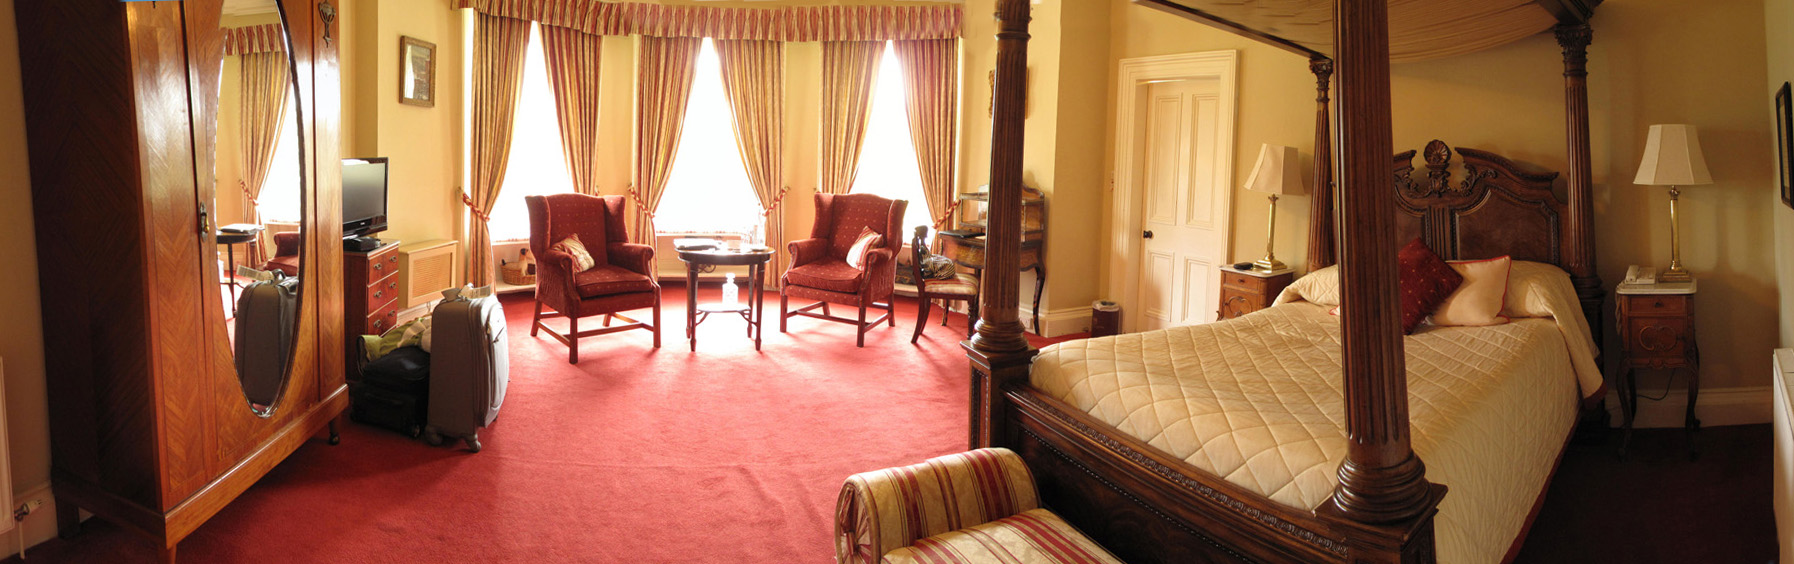 Four-poster room at Ballyseede Castle